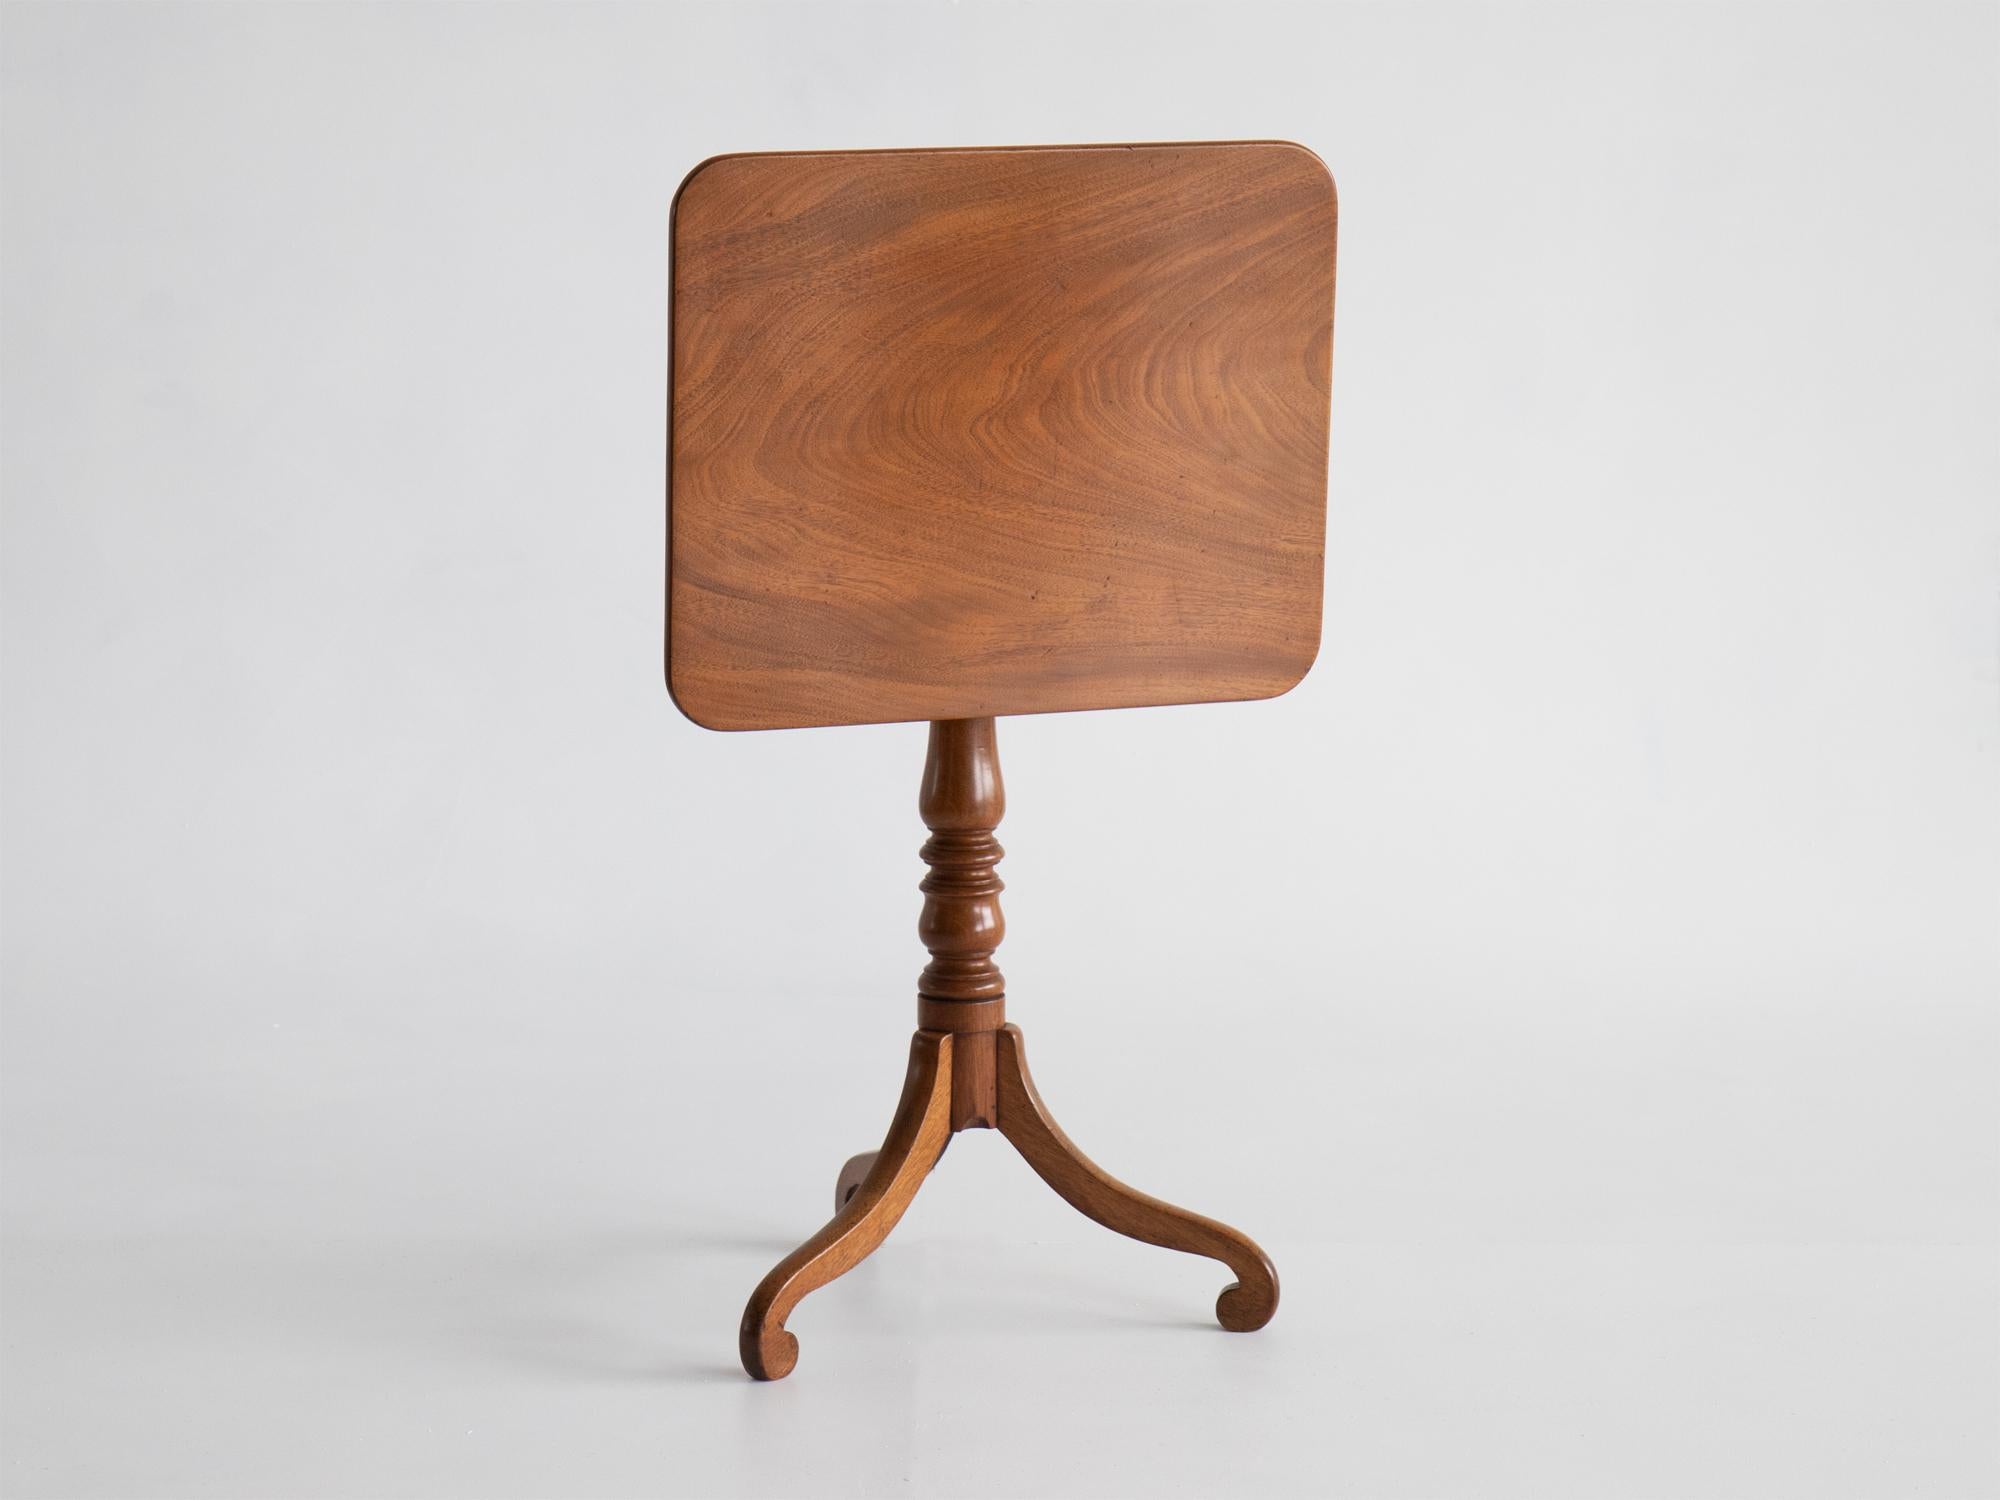 A mahogany tilt-top occasional or side table. English, 19th century.

Particularly pleasing form, raised by a turned column with inwardly scrolled legs.

In very good order with the tilt mechanism functioning well.

75 x 60 x 49 cm

29.5 x 23.6 x